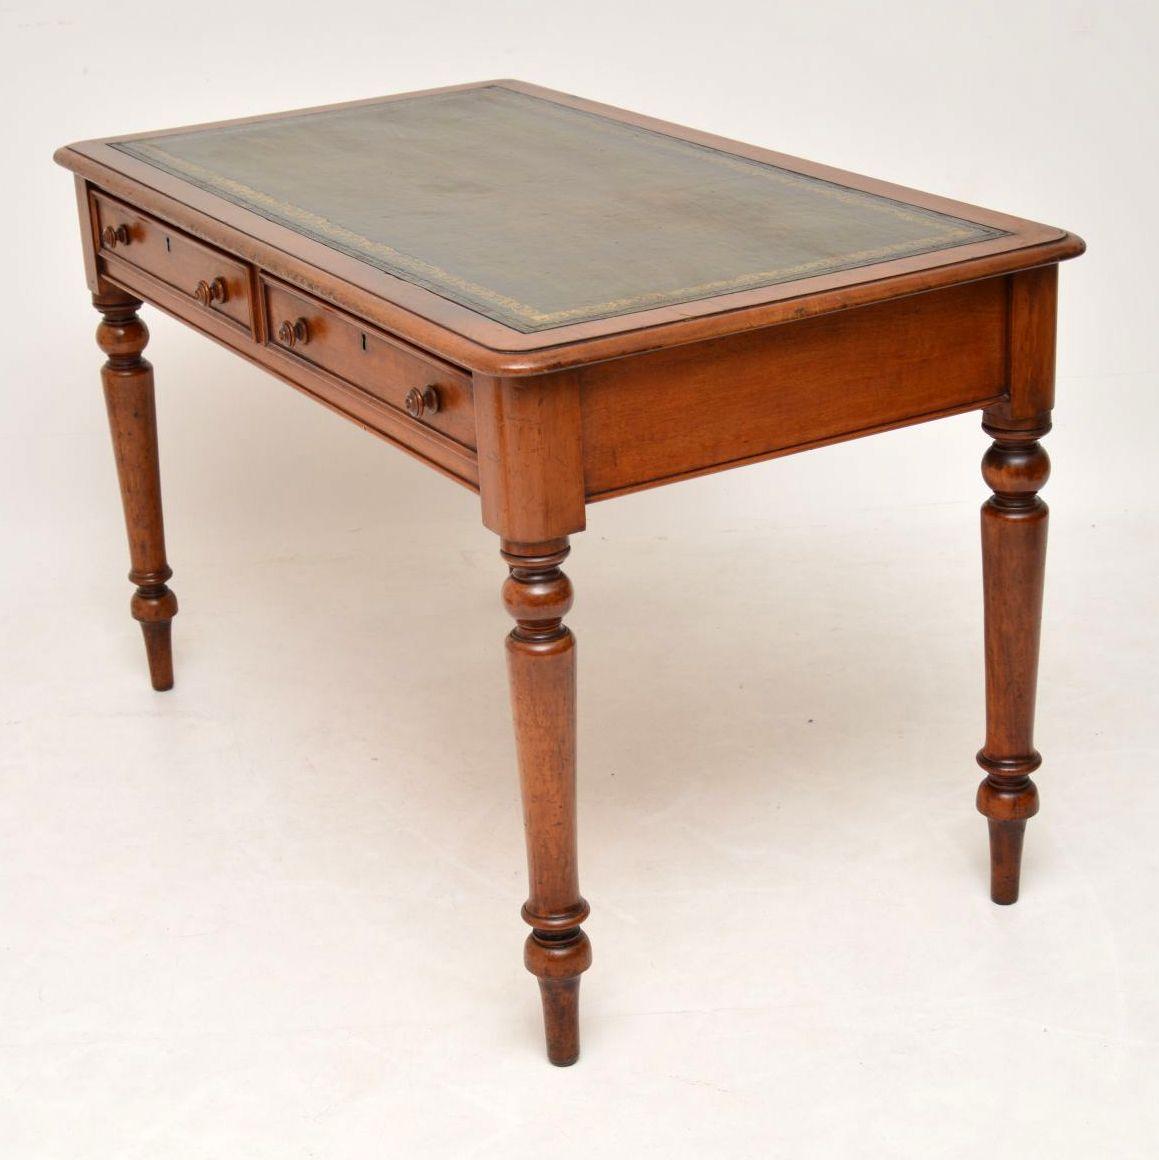 English Antique Victorian Mahogany Leather Top Writing Table Desk